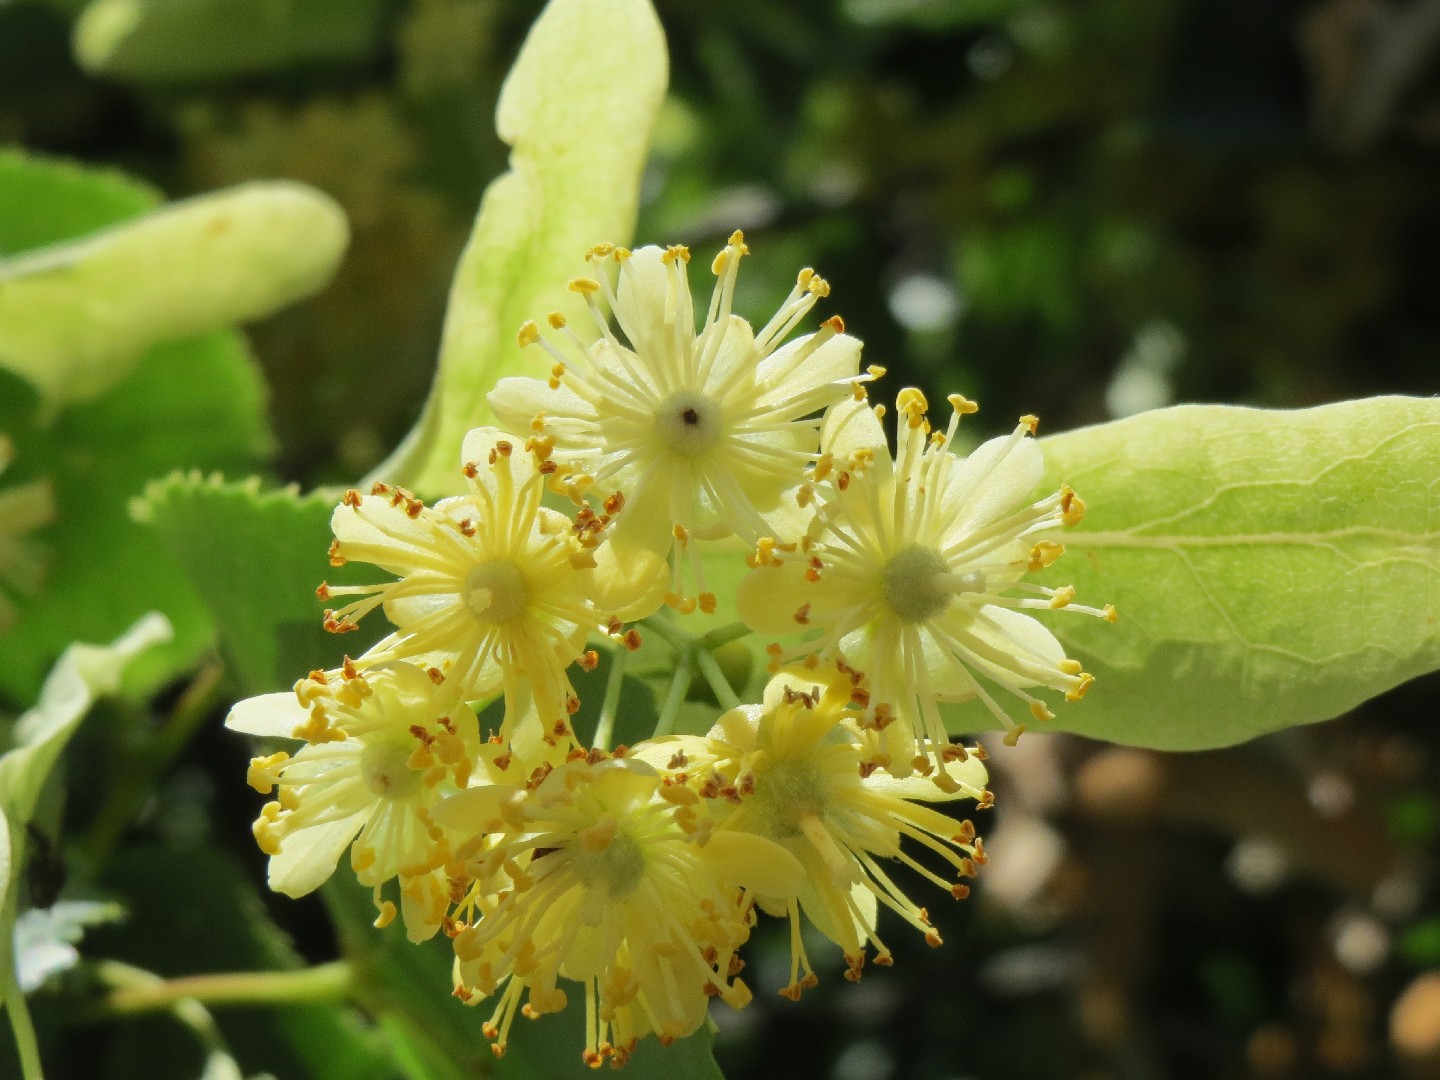 Small-leaved lime (Tilia cordata) Flower, Leaf, Care, Uses - PictureThis